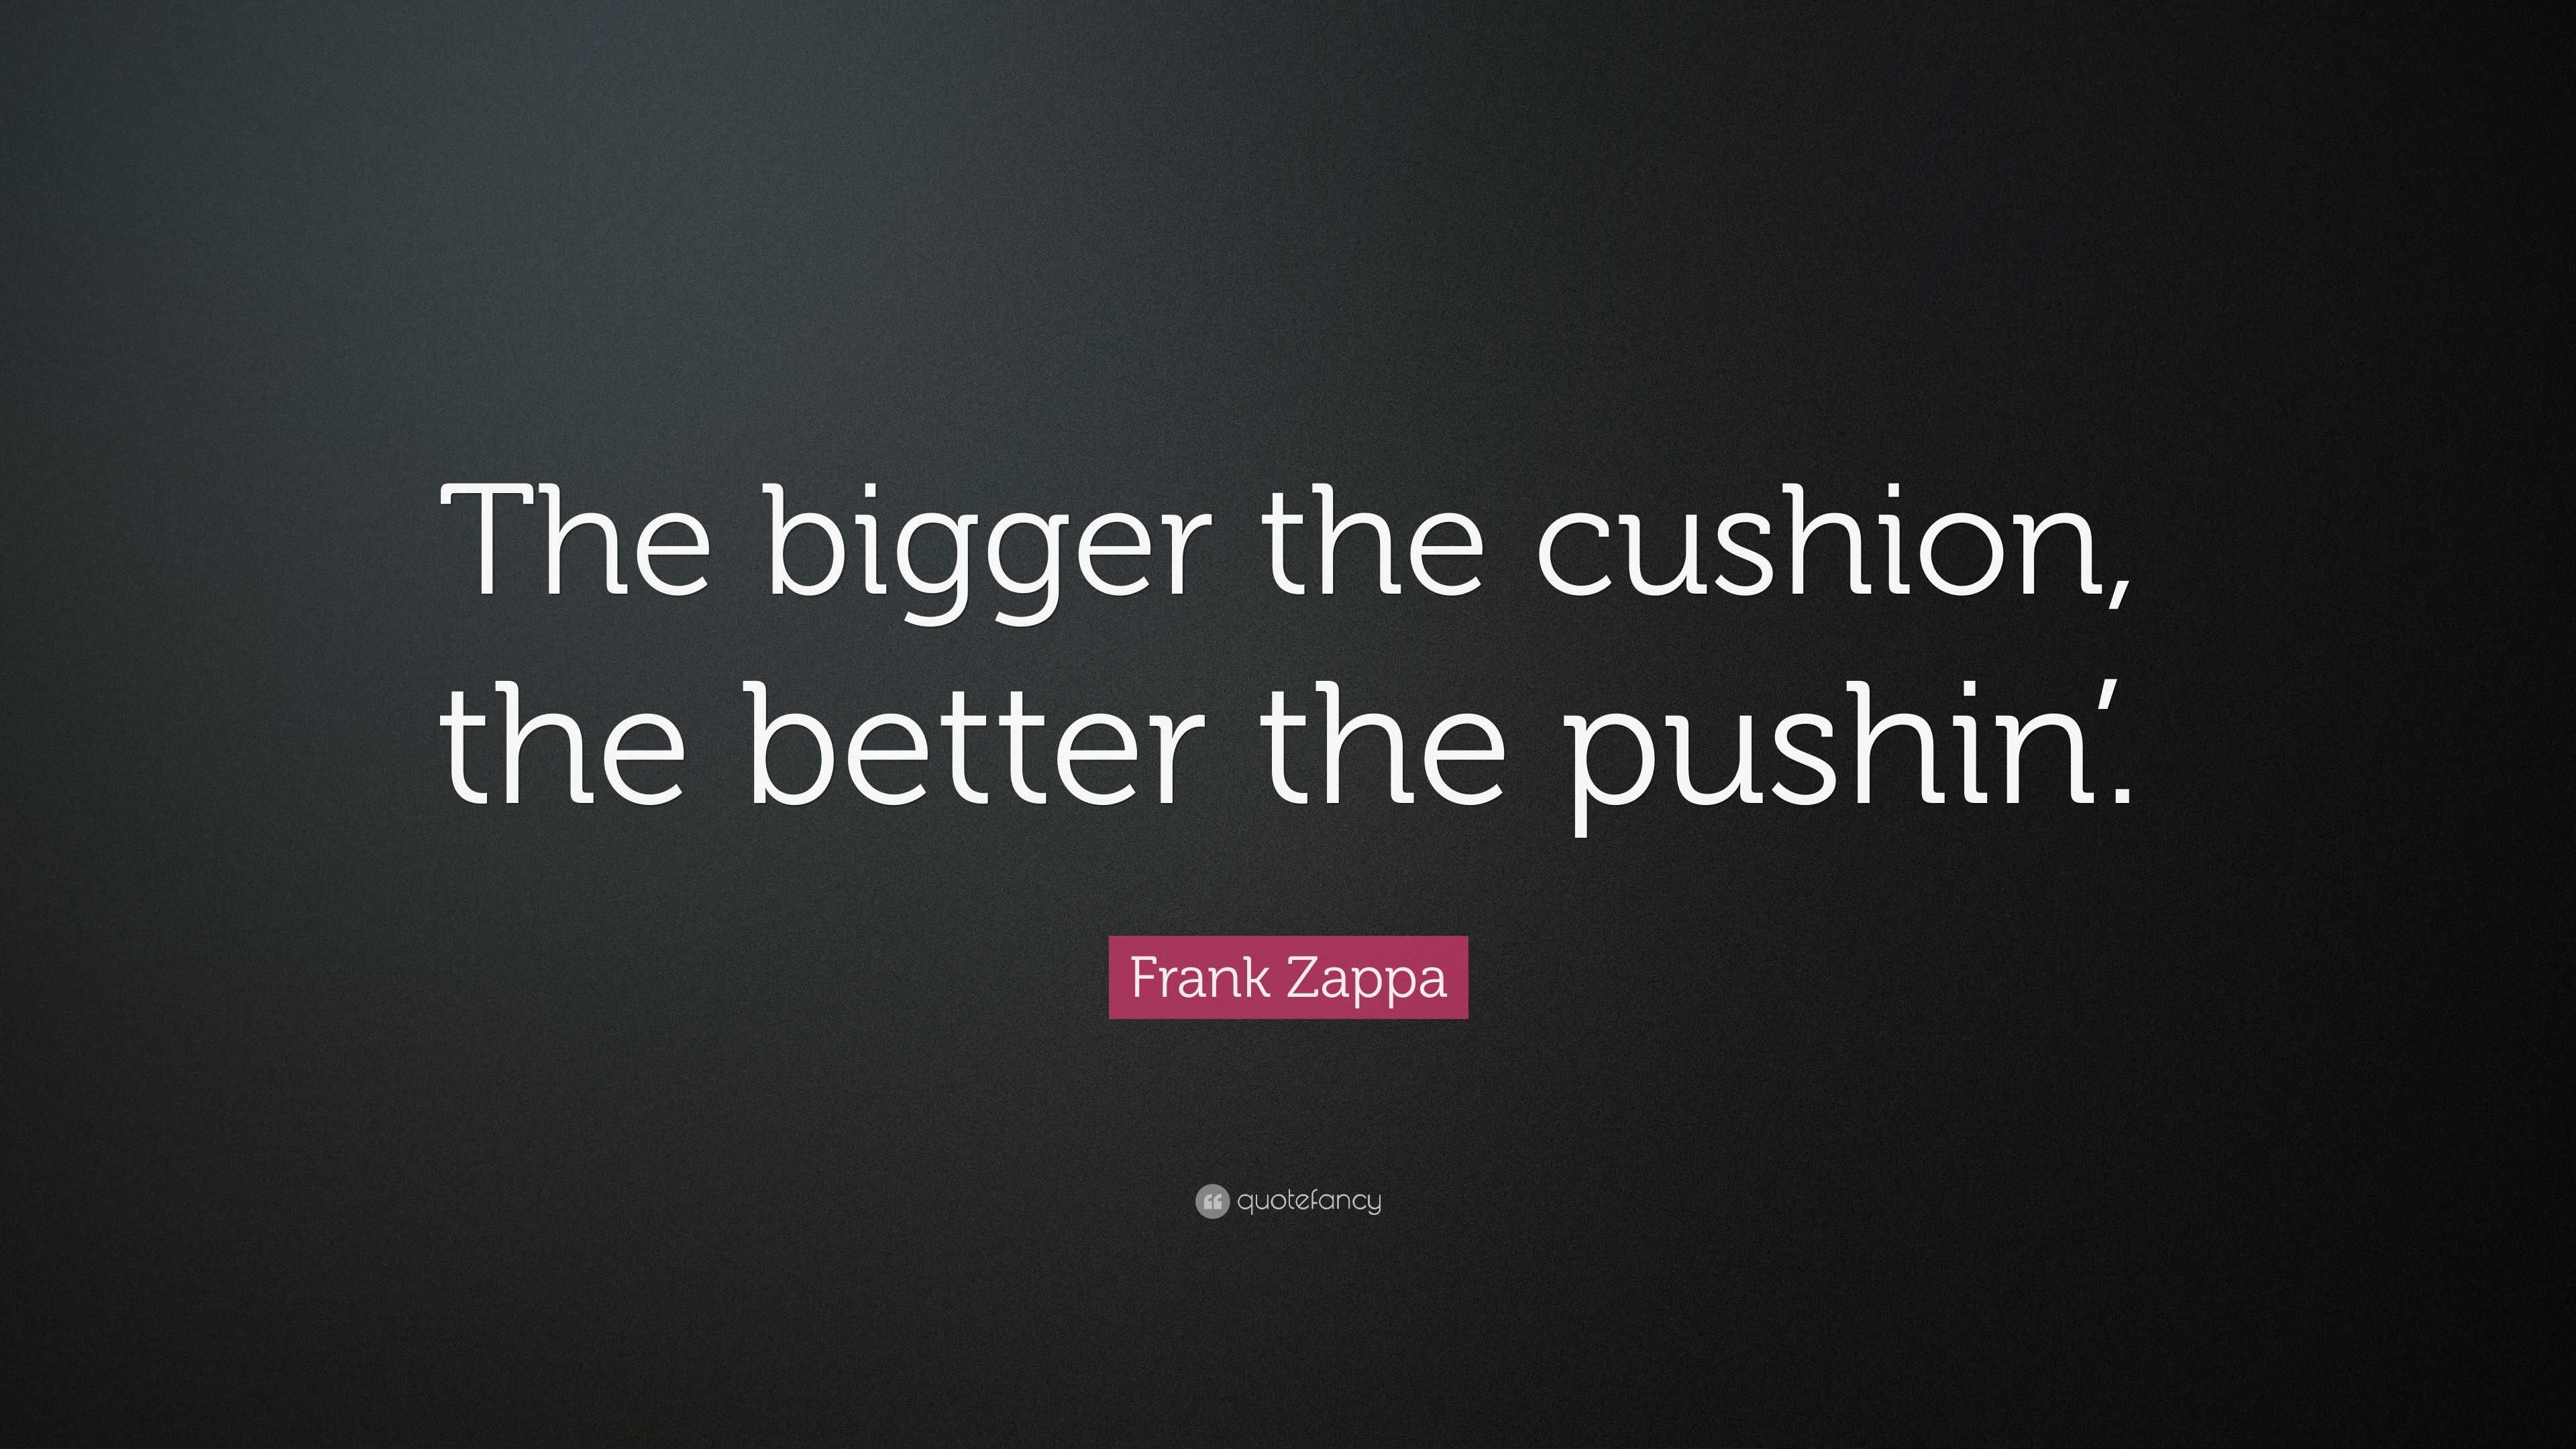 Frank Zappa Quote: "The bigger the cushion, the better the pushin'." (10 wallpapers) - Quotefancy